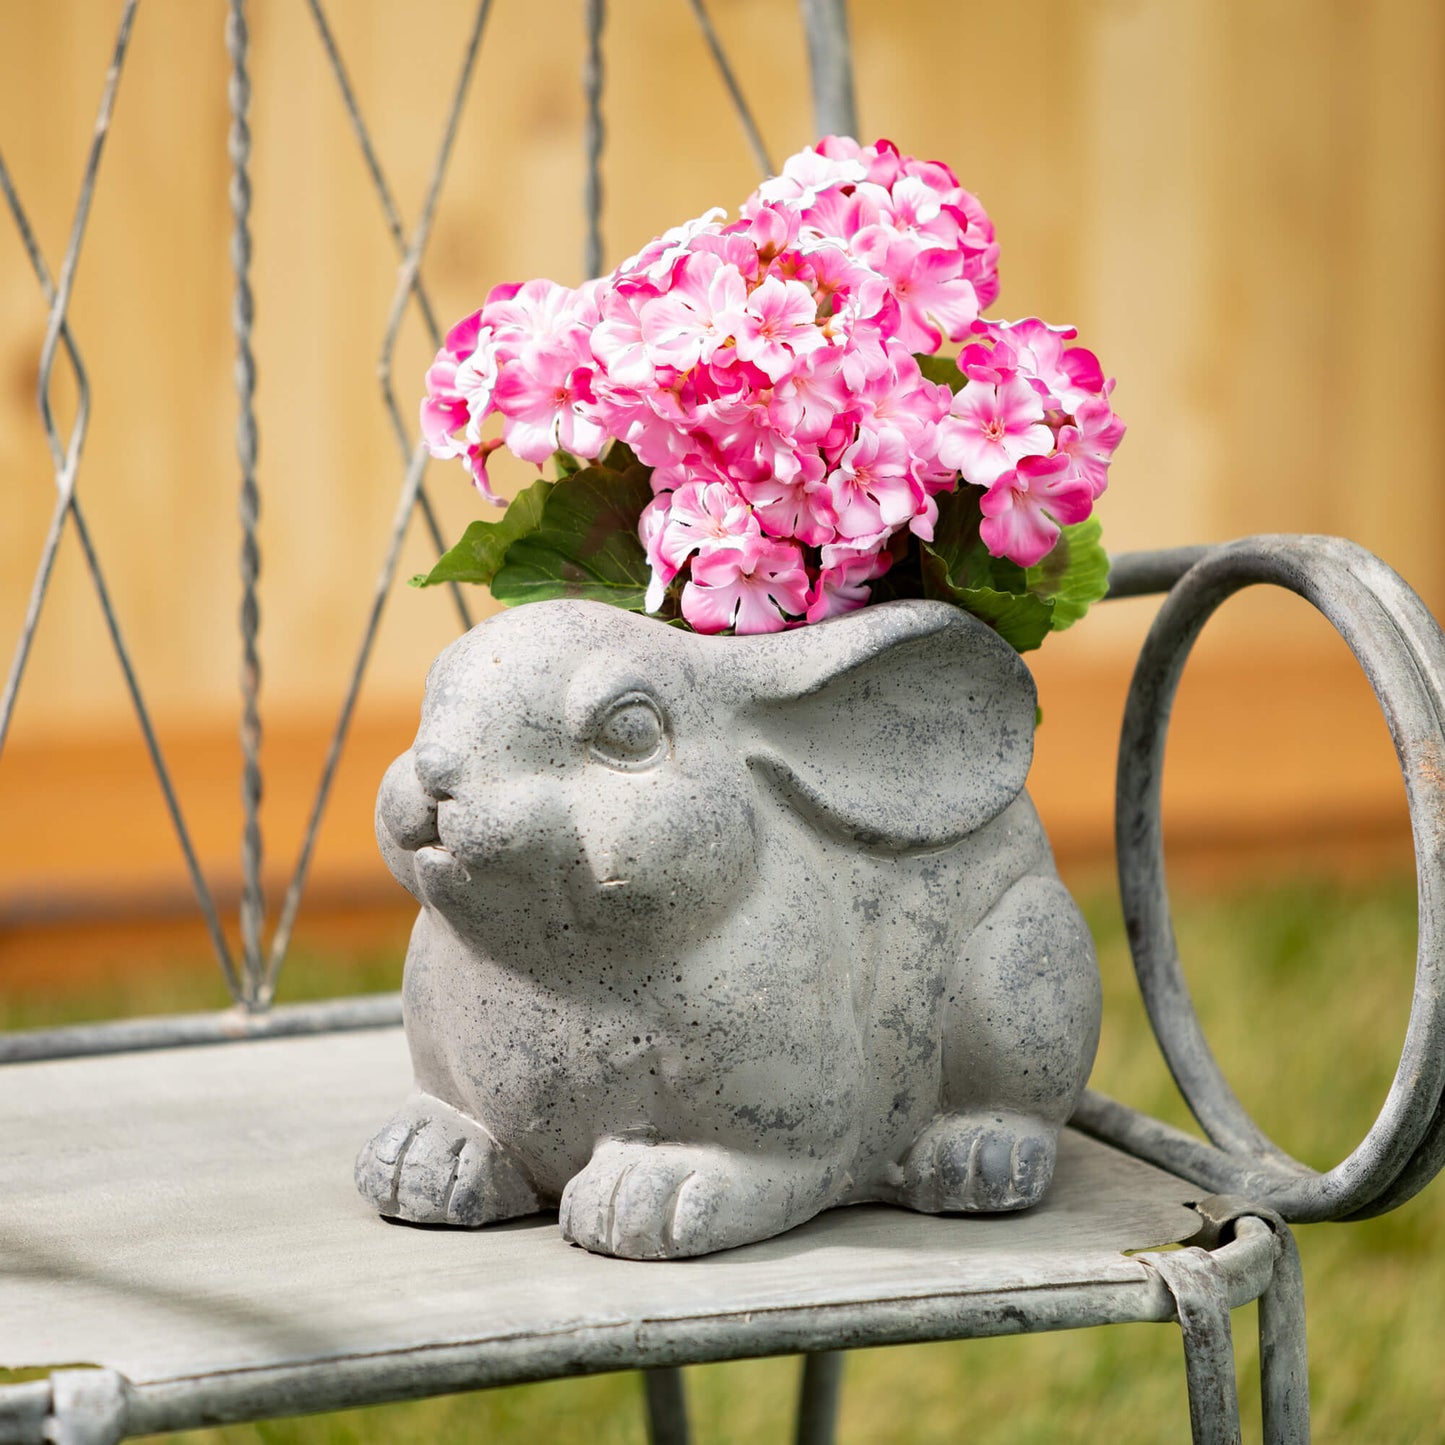 bunny planter filled with pink flowers.